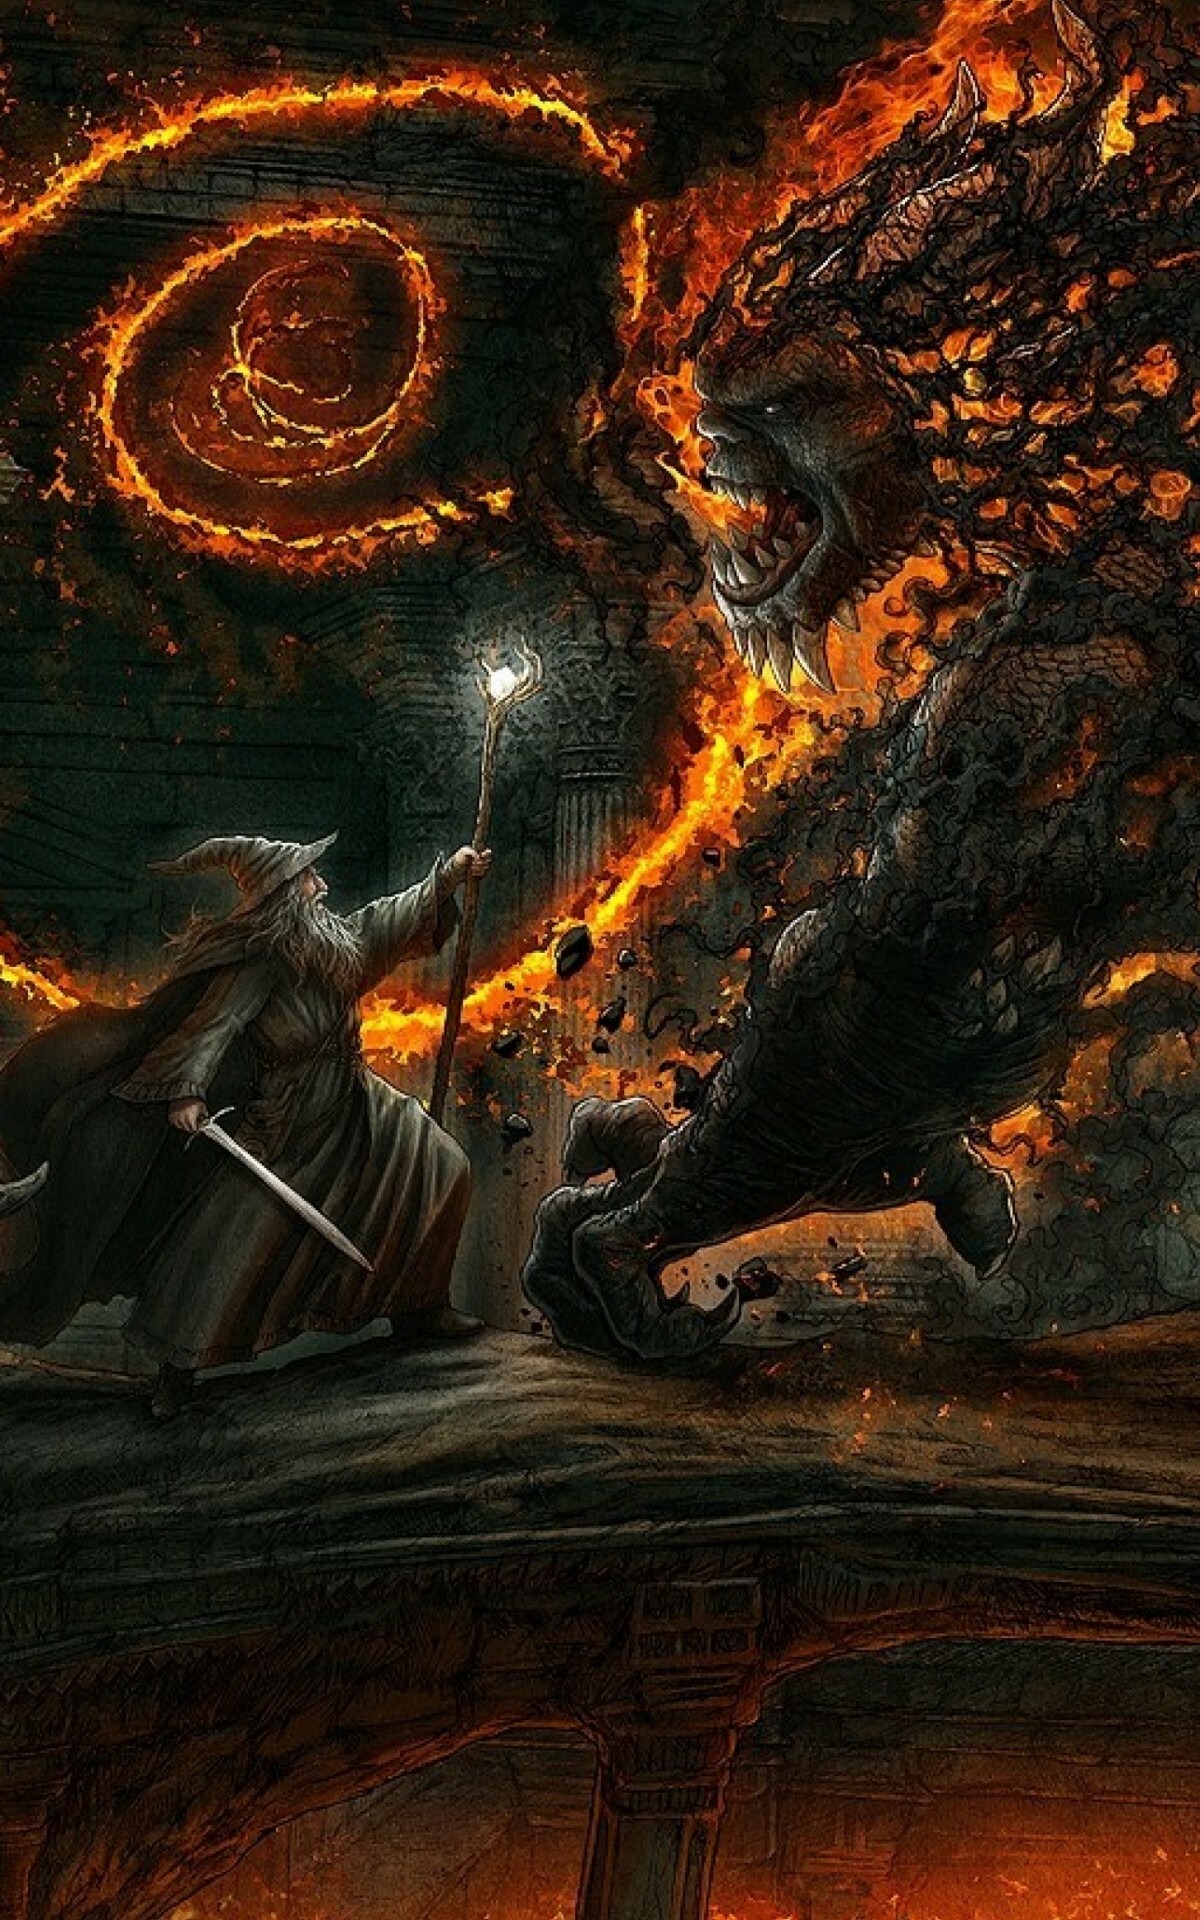 The Lord of the Rings: A Balrog, A powerful demonic monster in J. R. R. Tolkien's Middle-earth. 1200x1920 HD Wallpaper.